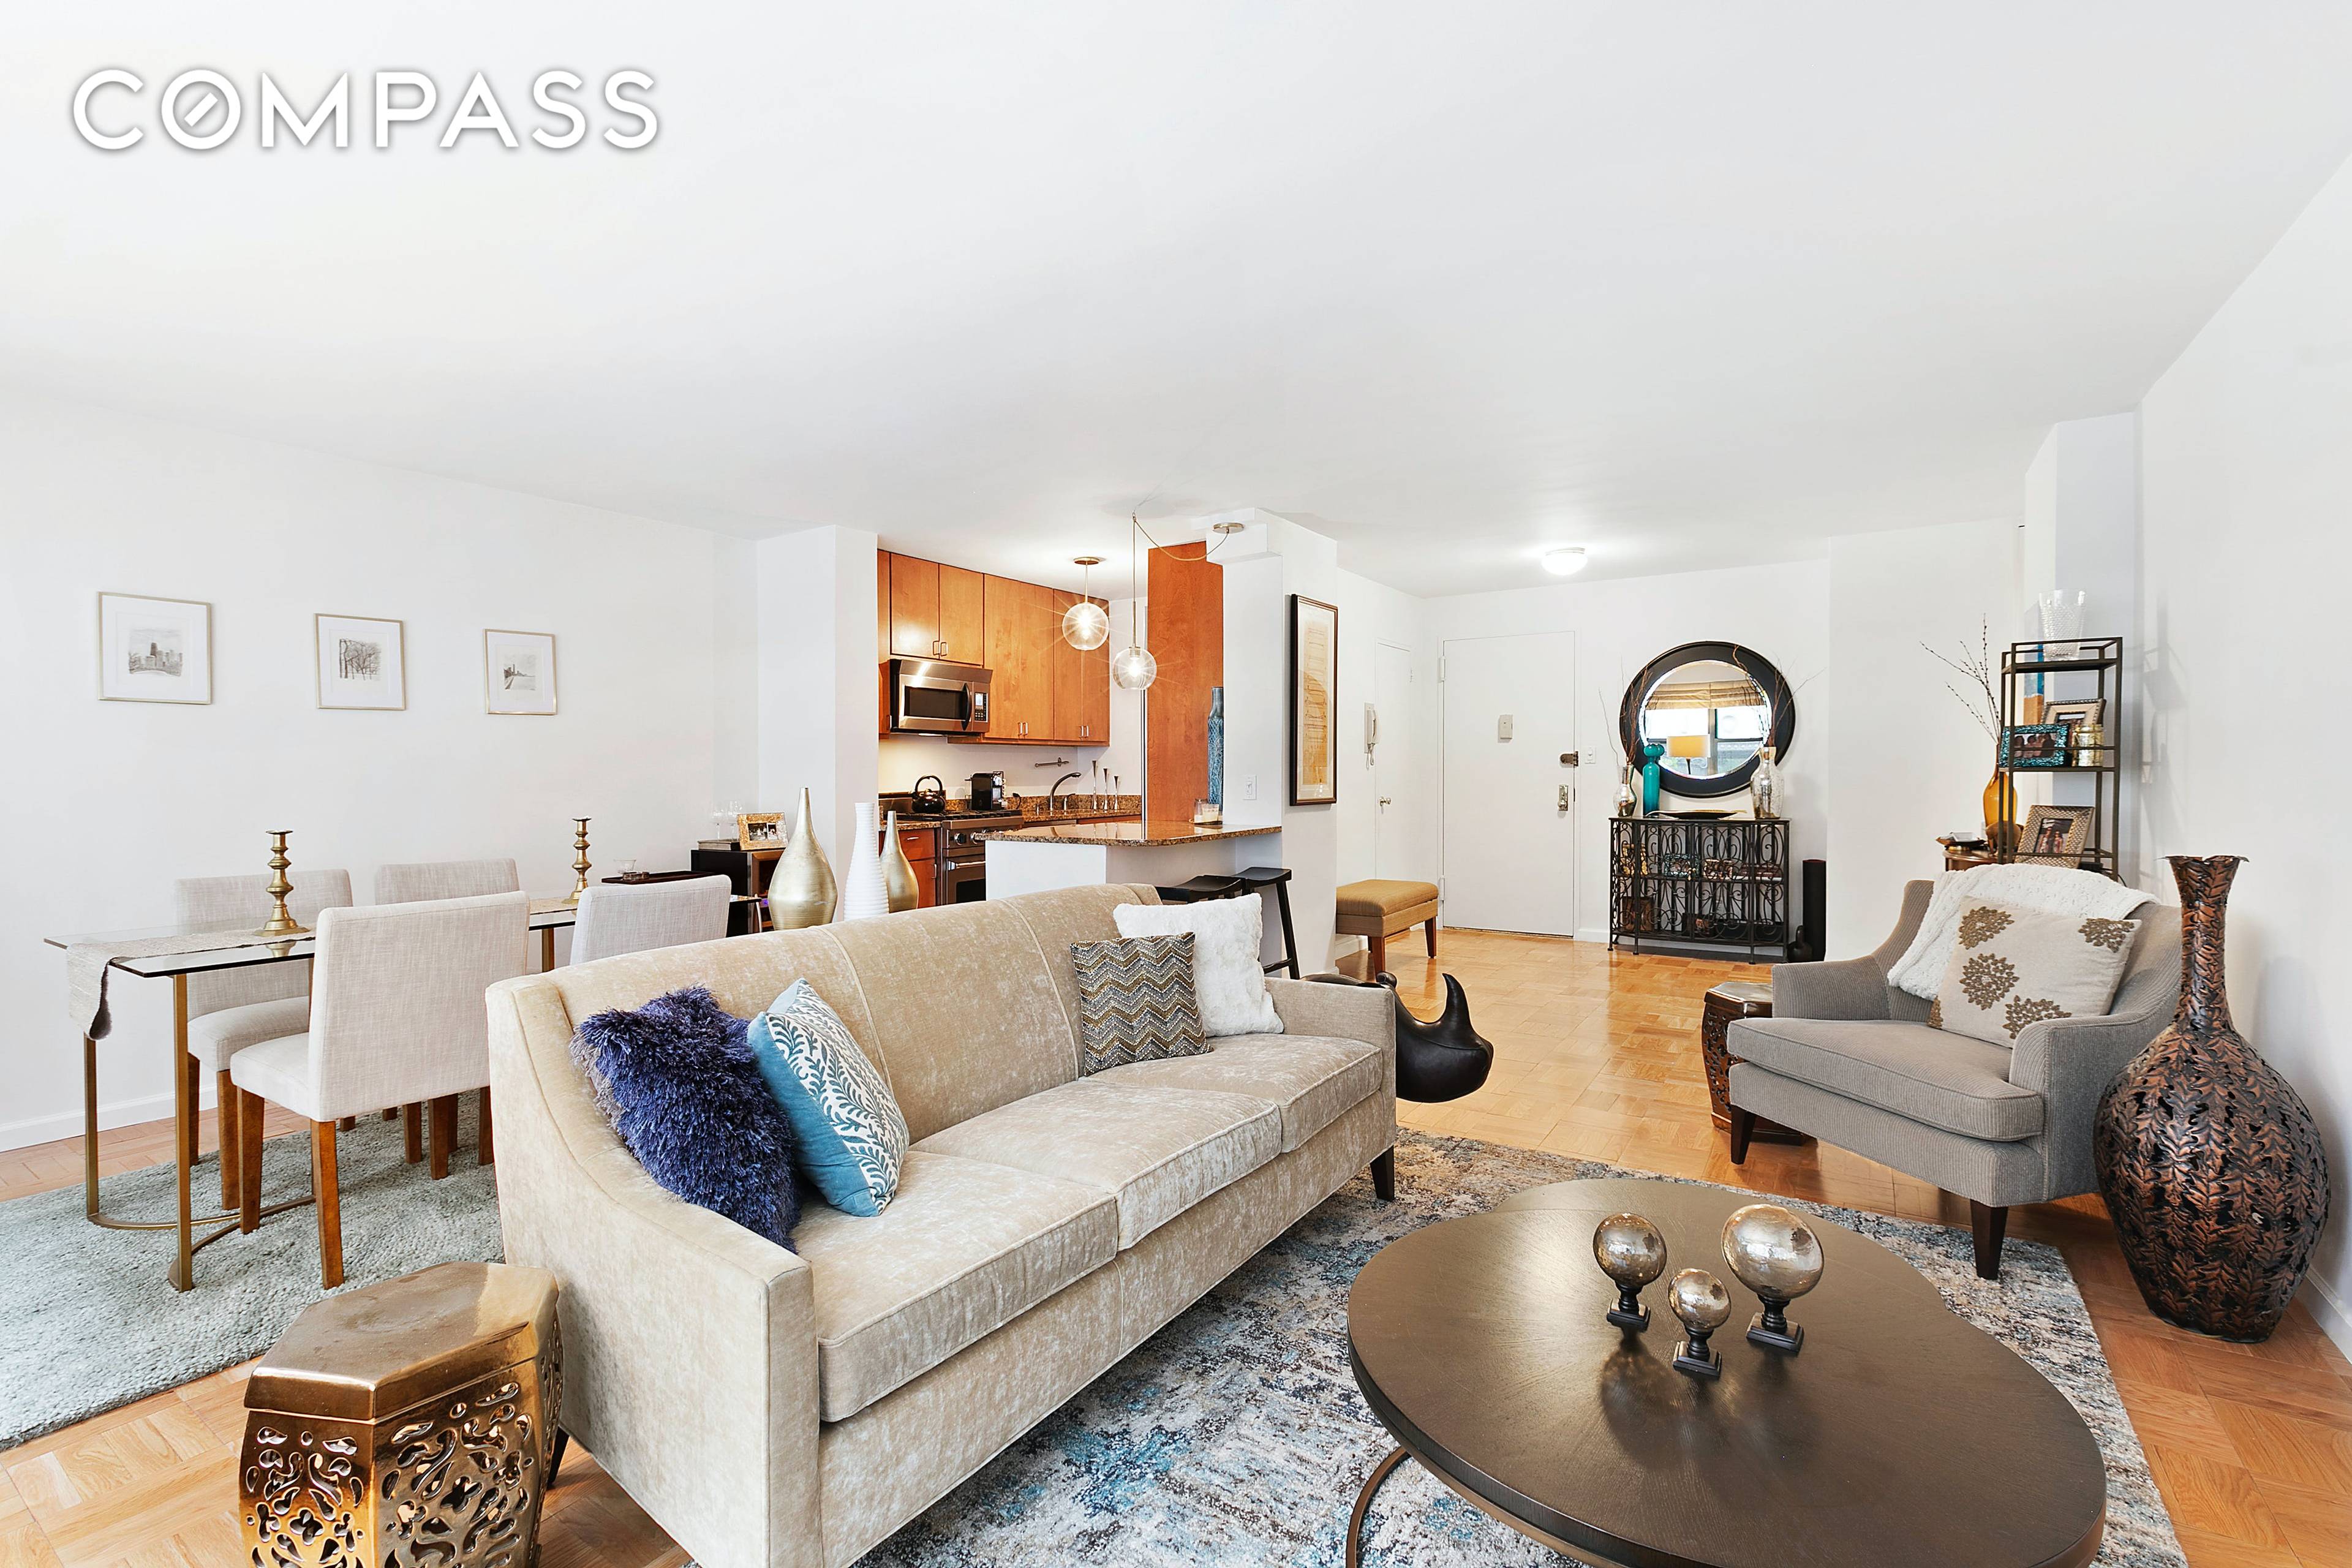 Welcome to 60 West 13th Street, Unit 5C the spacious and sunny one bedroom home that you ve been looking for.